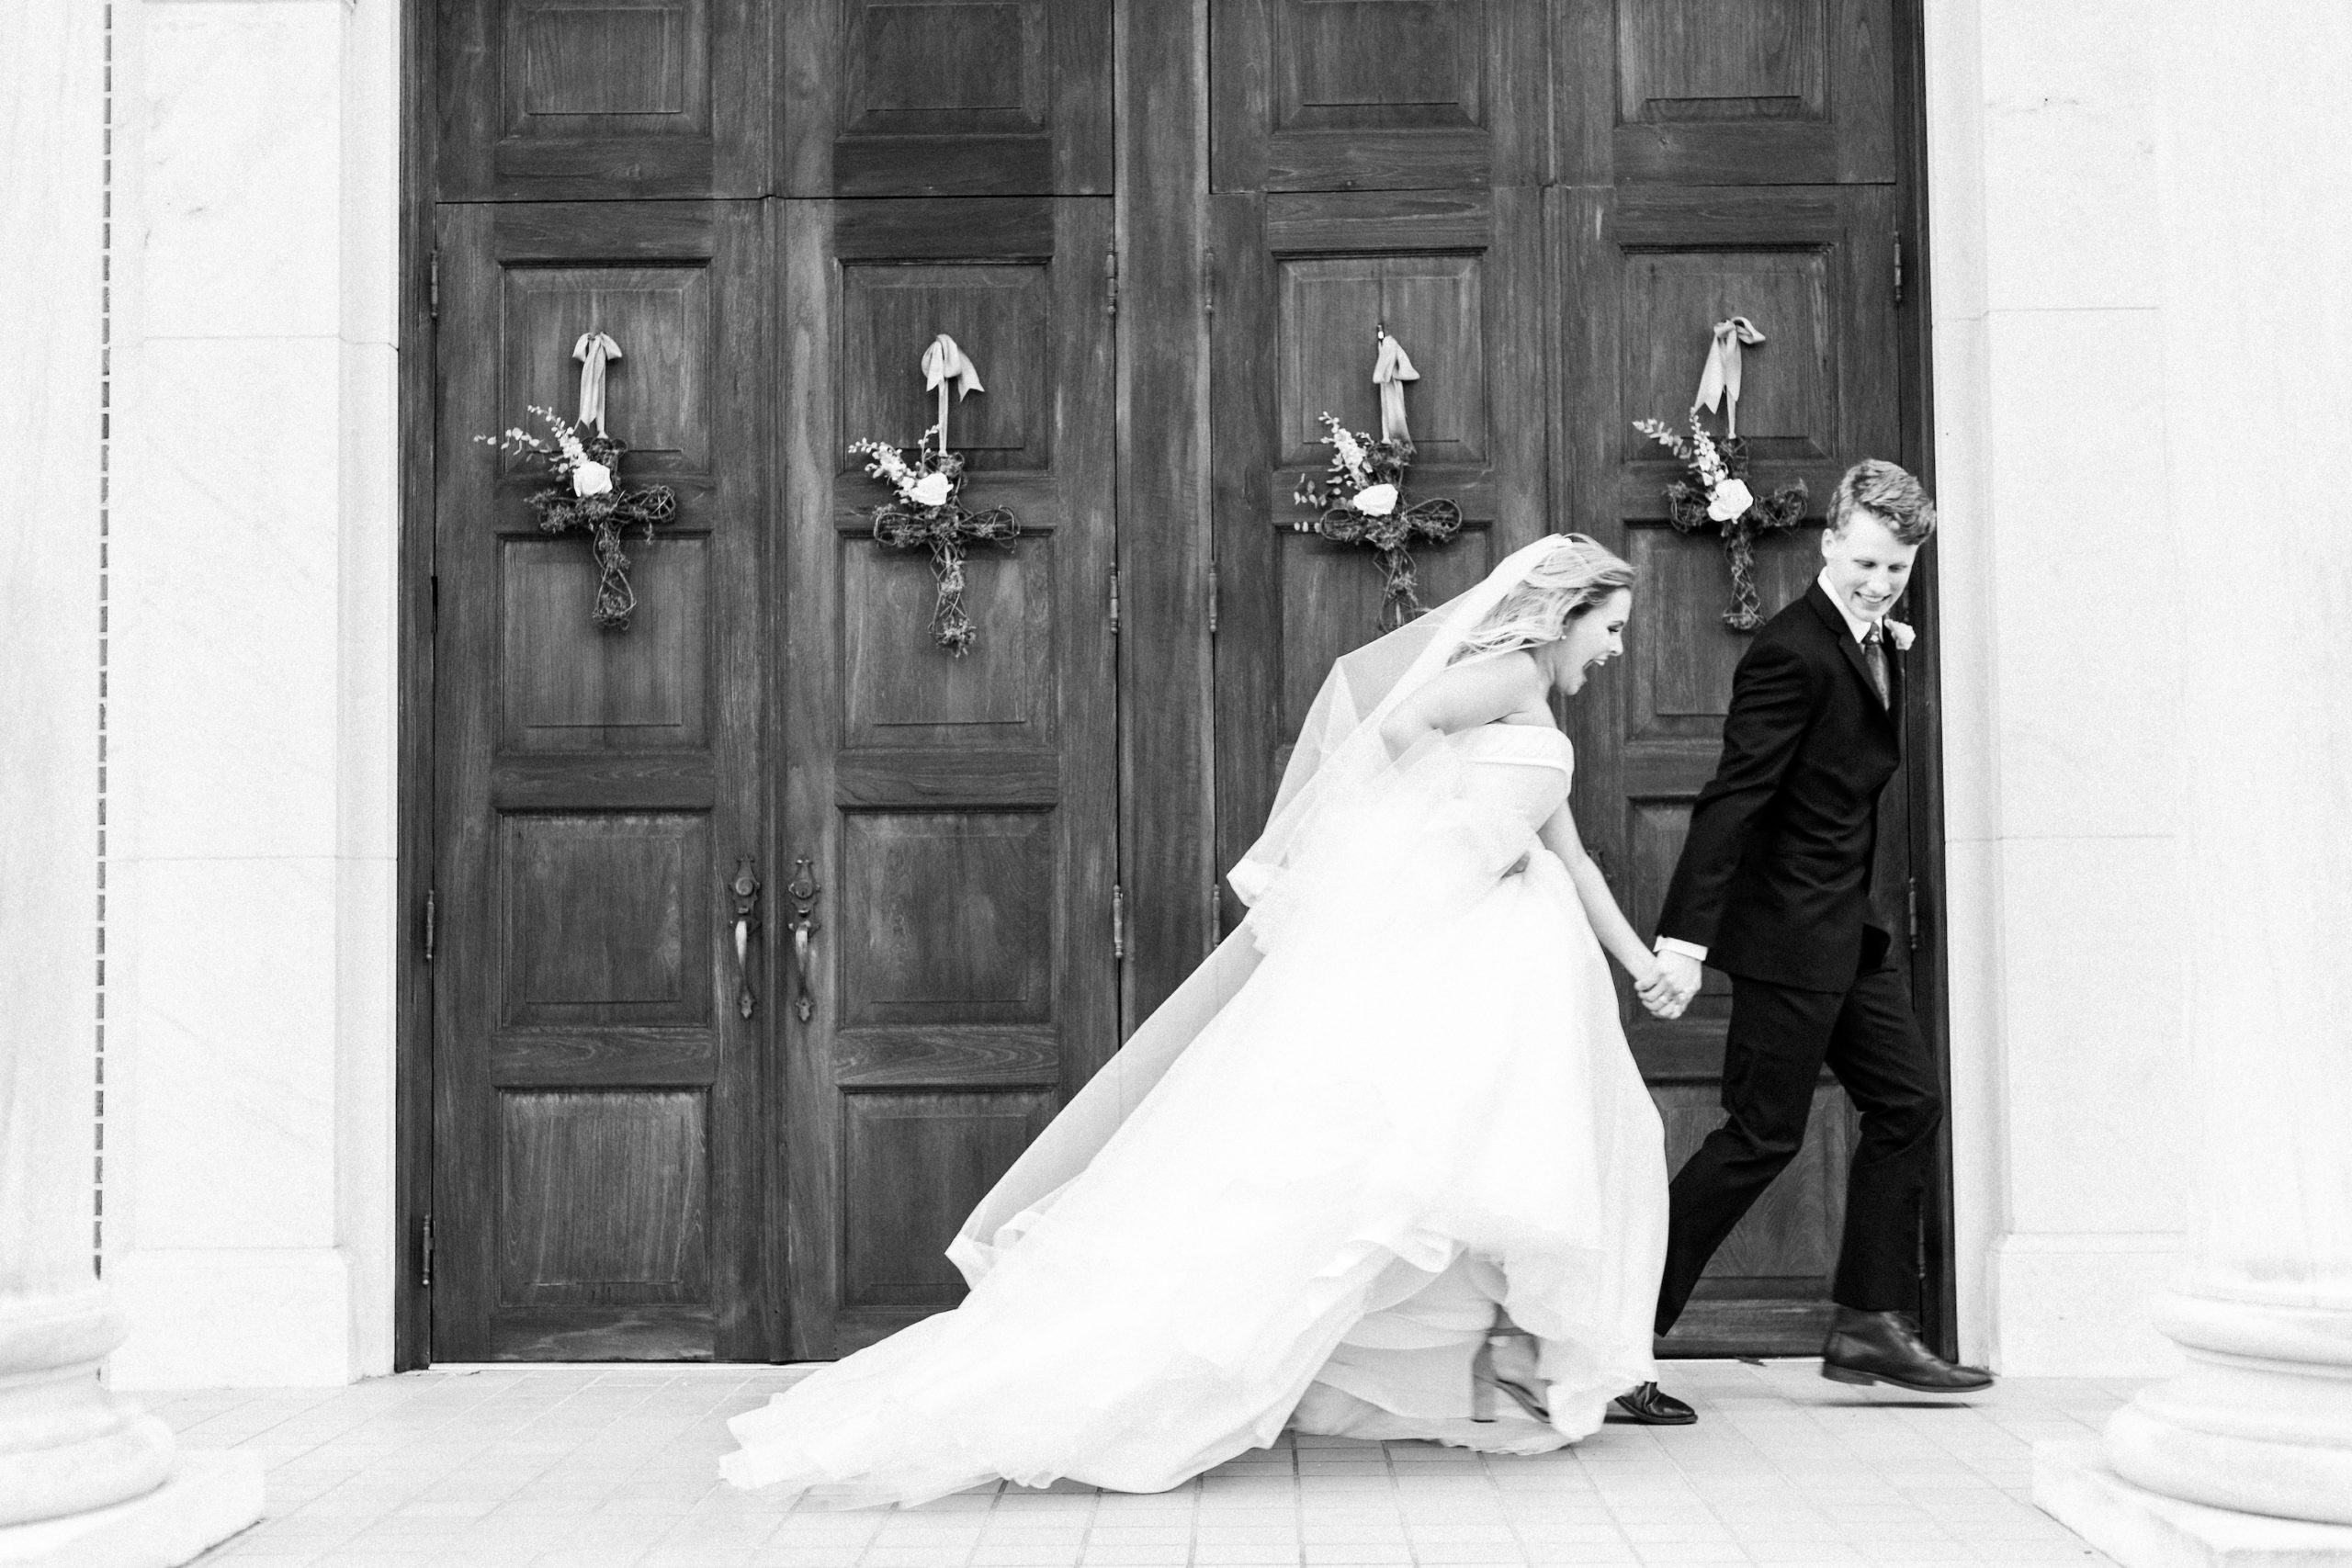 As a destination wedding photographer, I believe your wedding photos are more about capturing the adventure, romance, and authentic laughter of your wedding day! Learn more here: https://www.jjauclair.com/5-wedding-photos